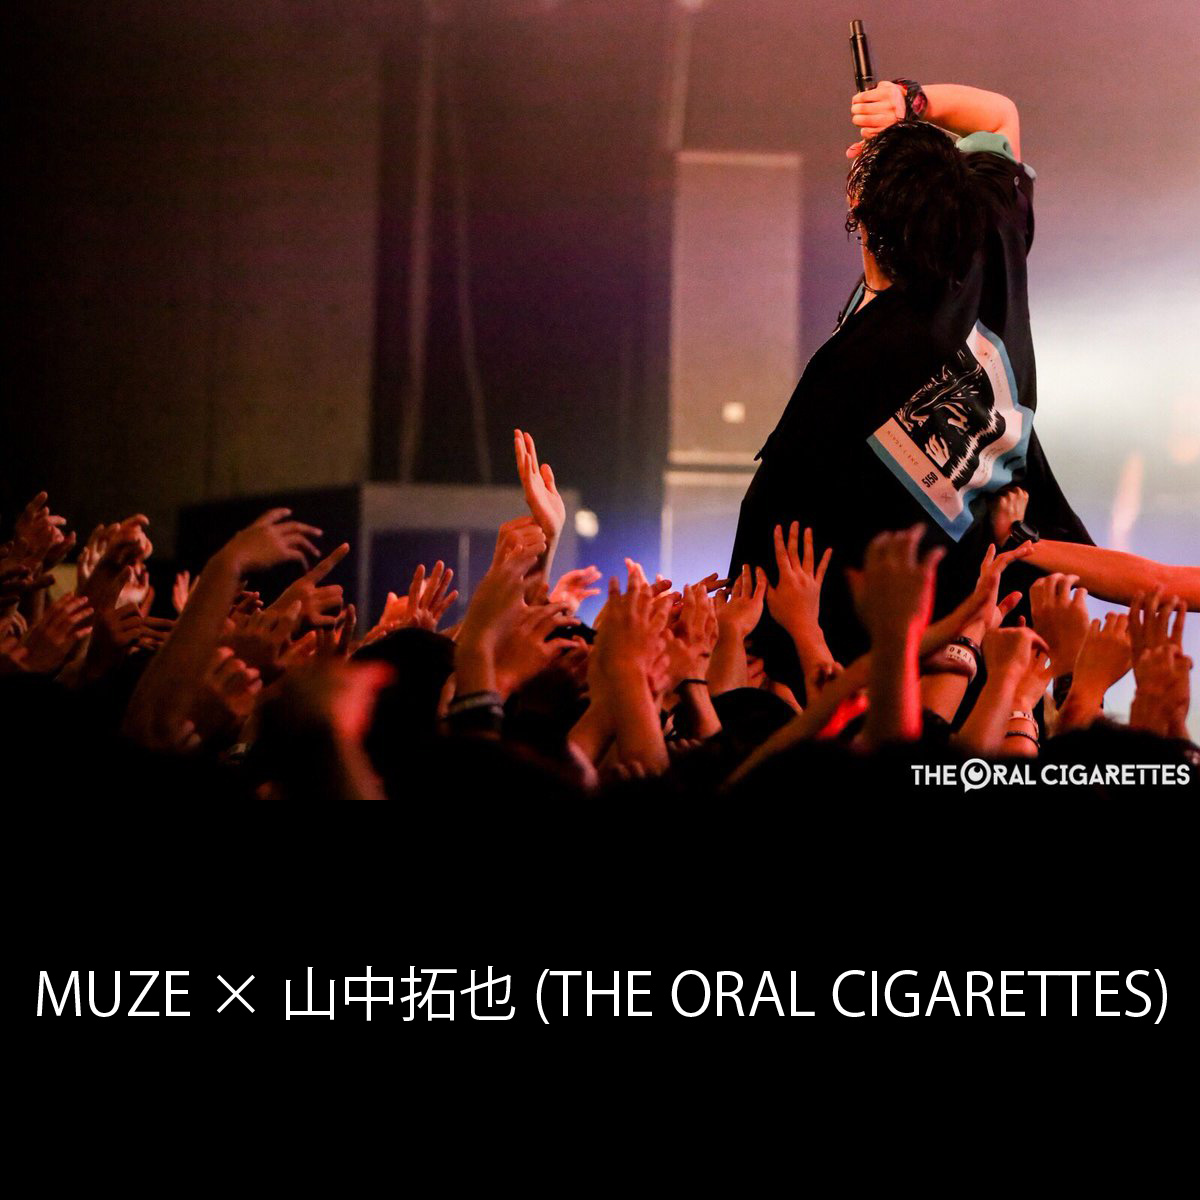 MUZE × THE ORAL CIGARETTES 山中拓也】 コラボレーションLIVE衣装を